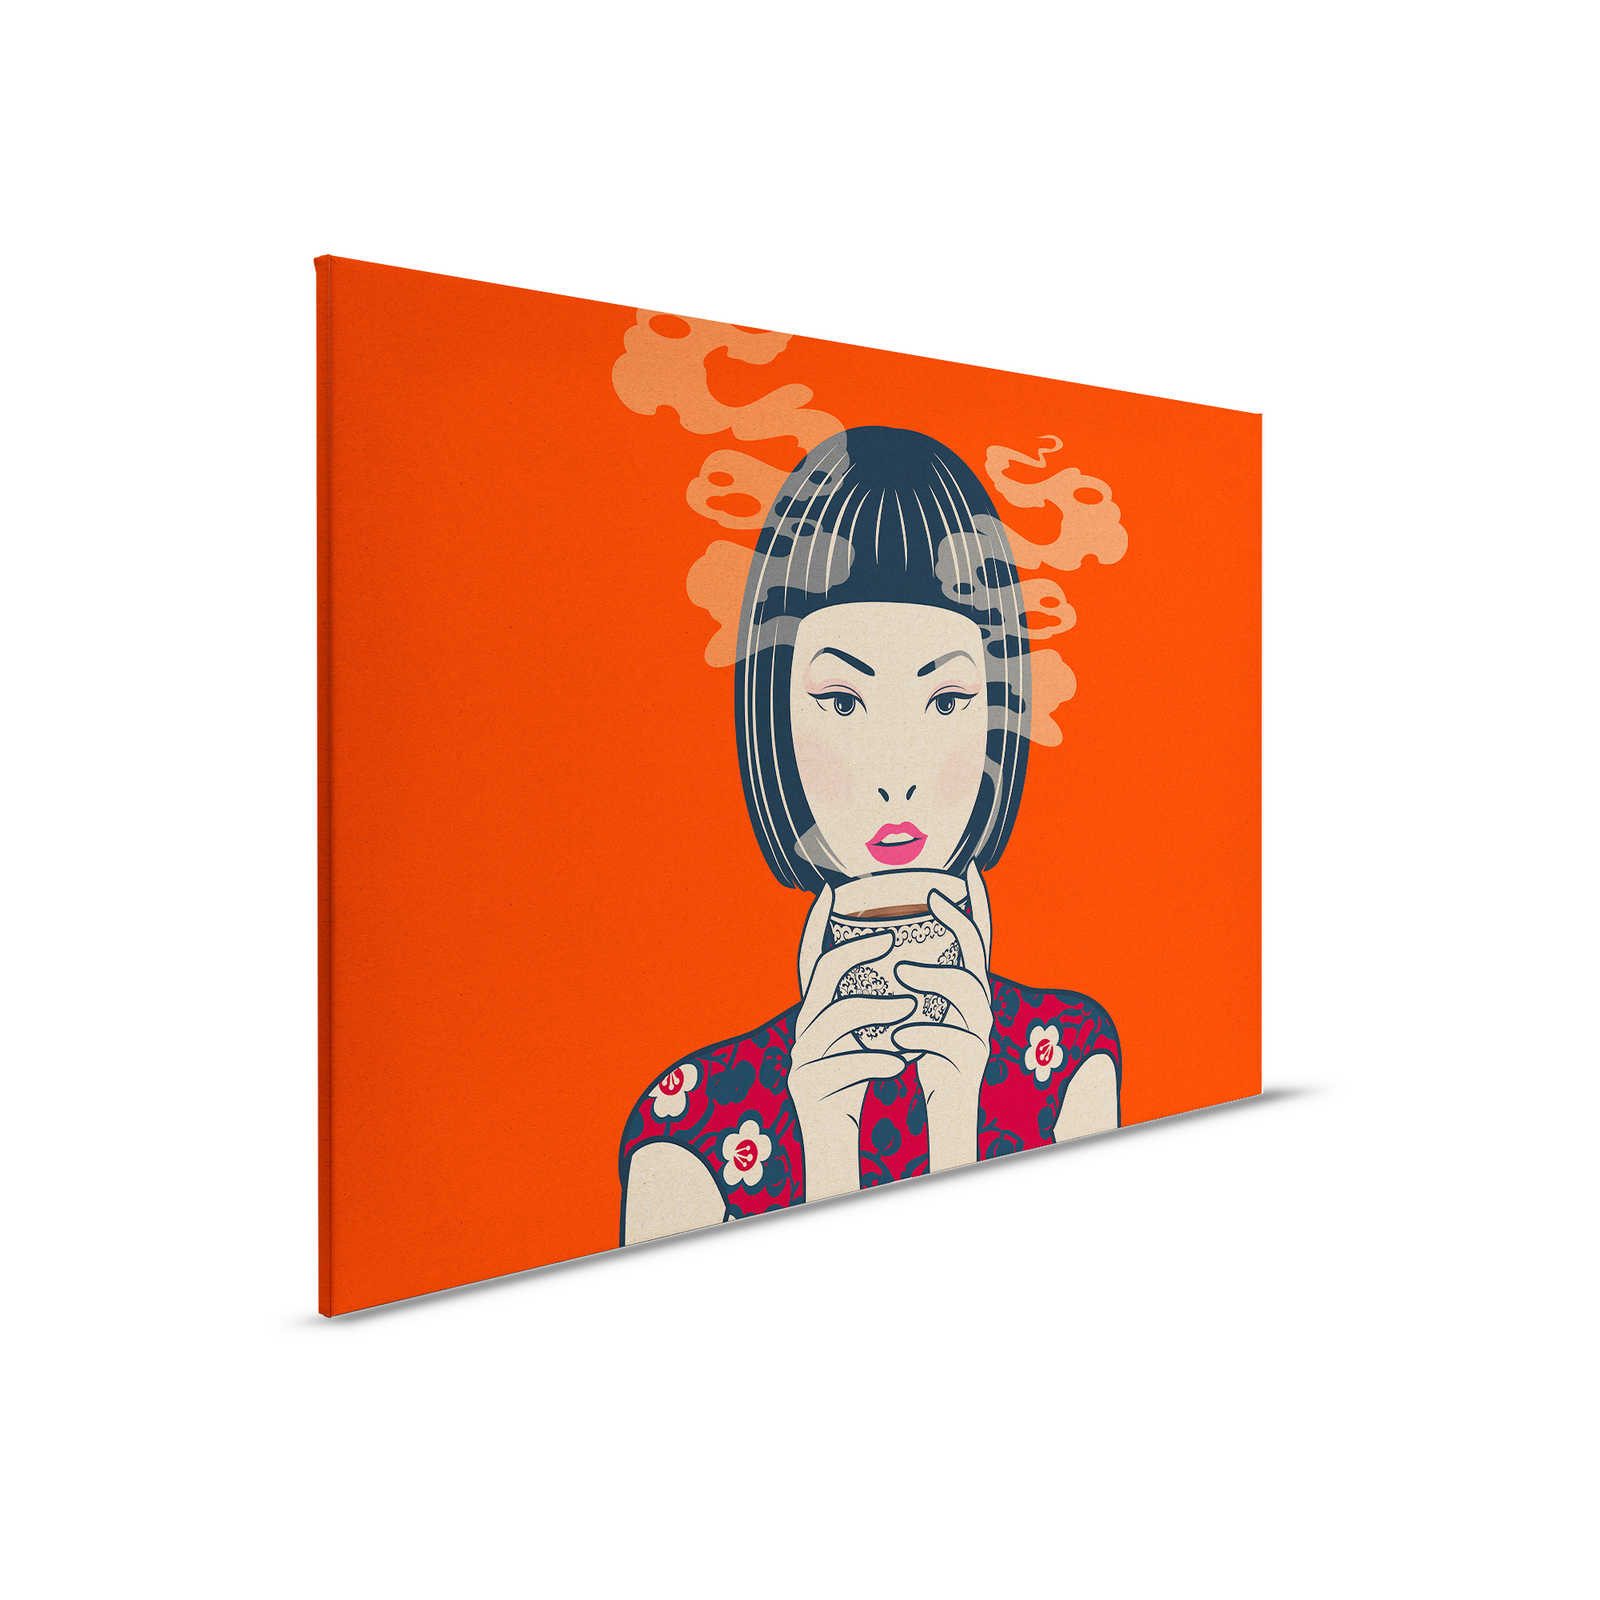         Akari 2 - Time for tea, manga style in cardboard structure on canvas picture - 0.90 m x 0.60 m
    